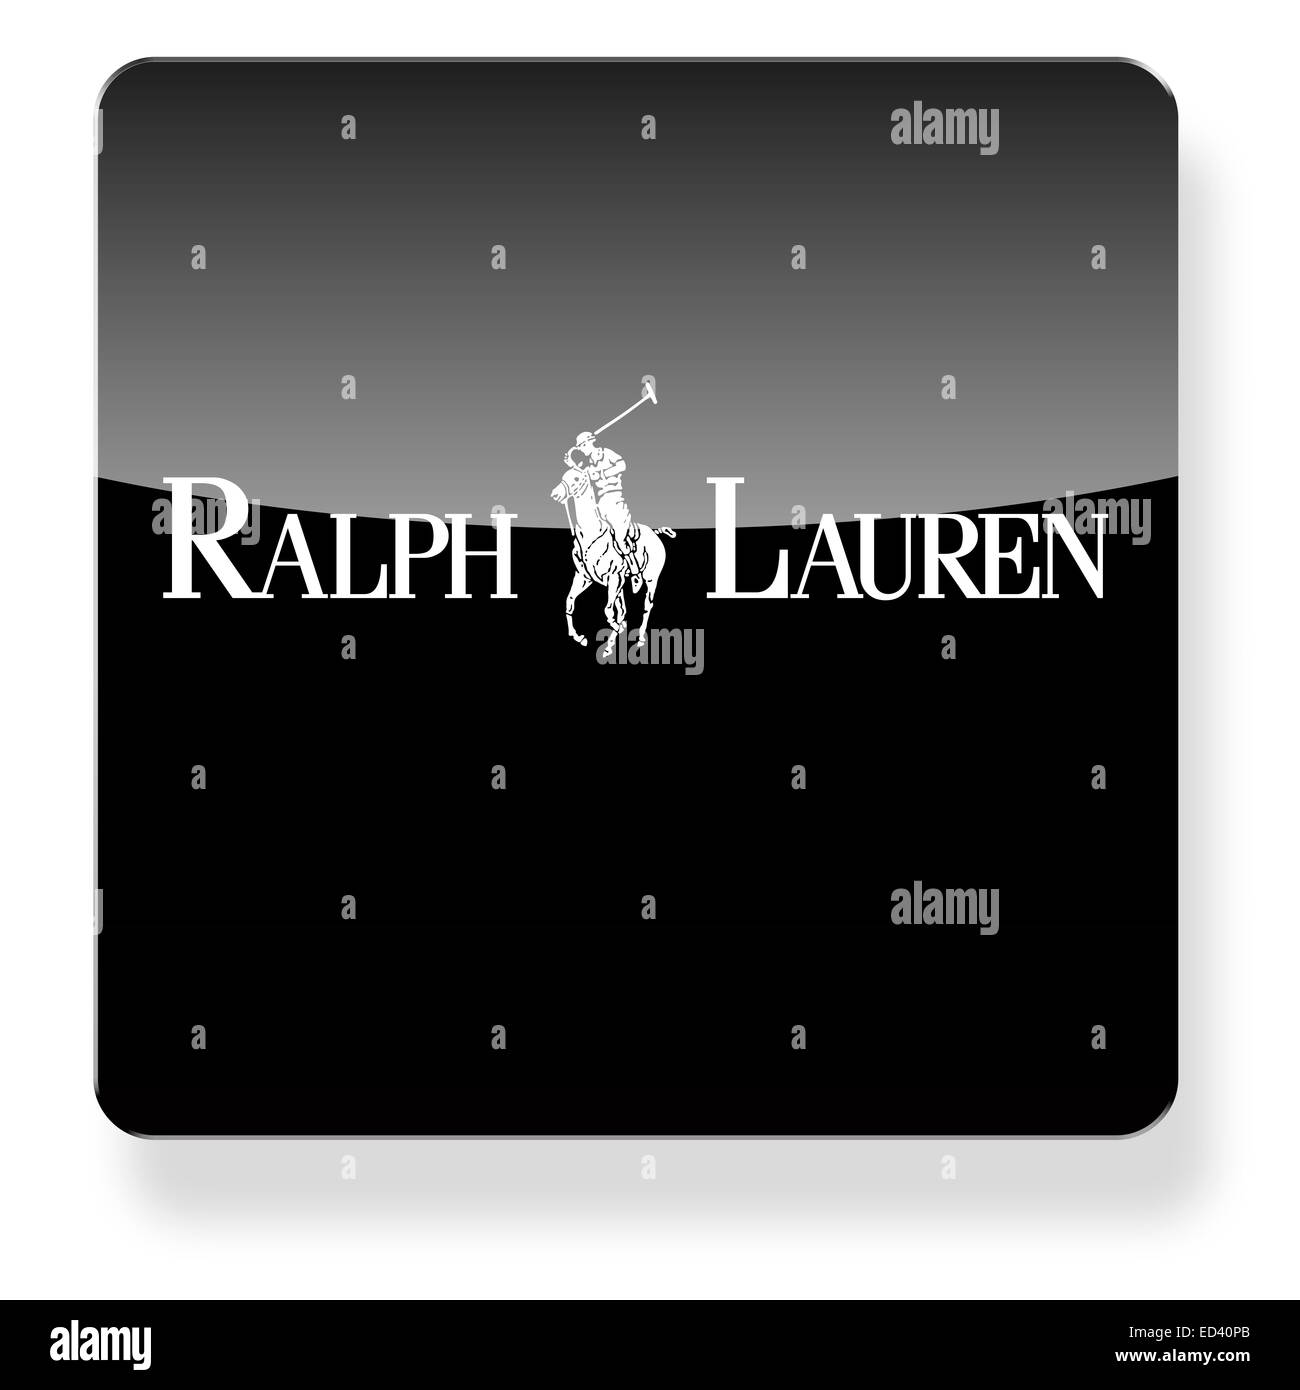 Ralph lauren Black and White Stock Photos & Images - Alamy